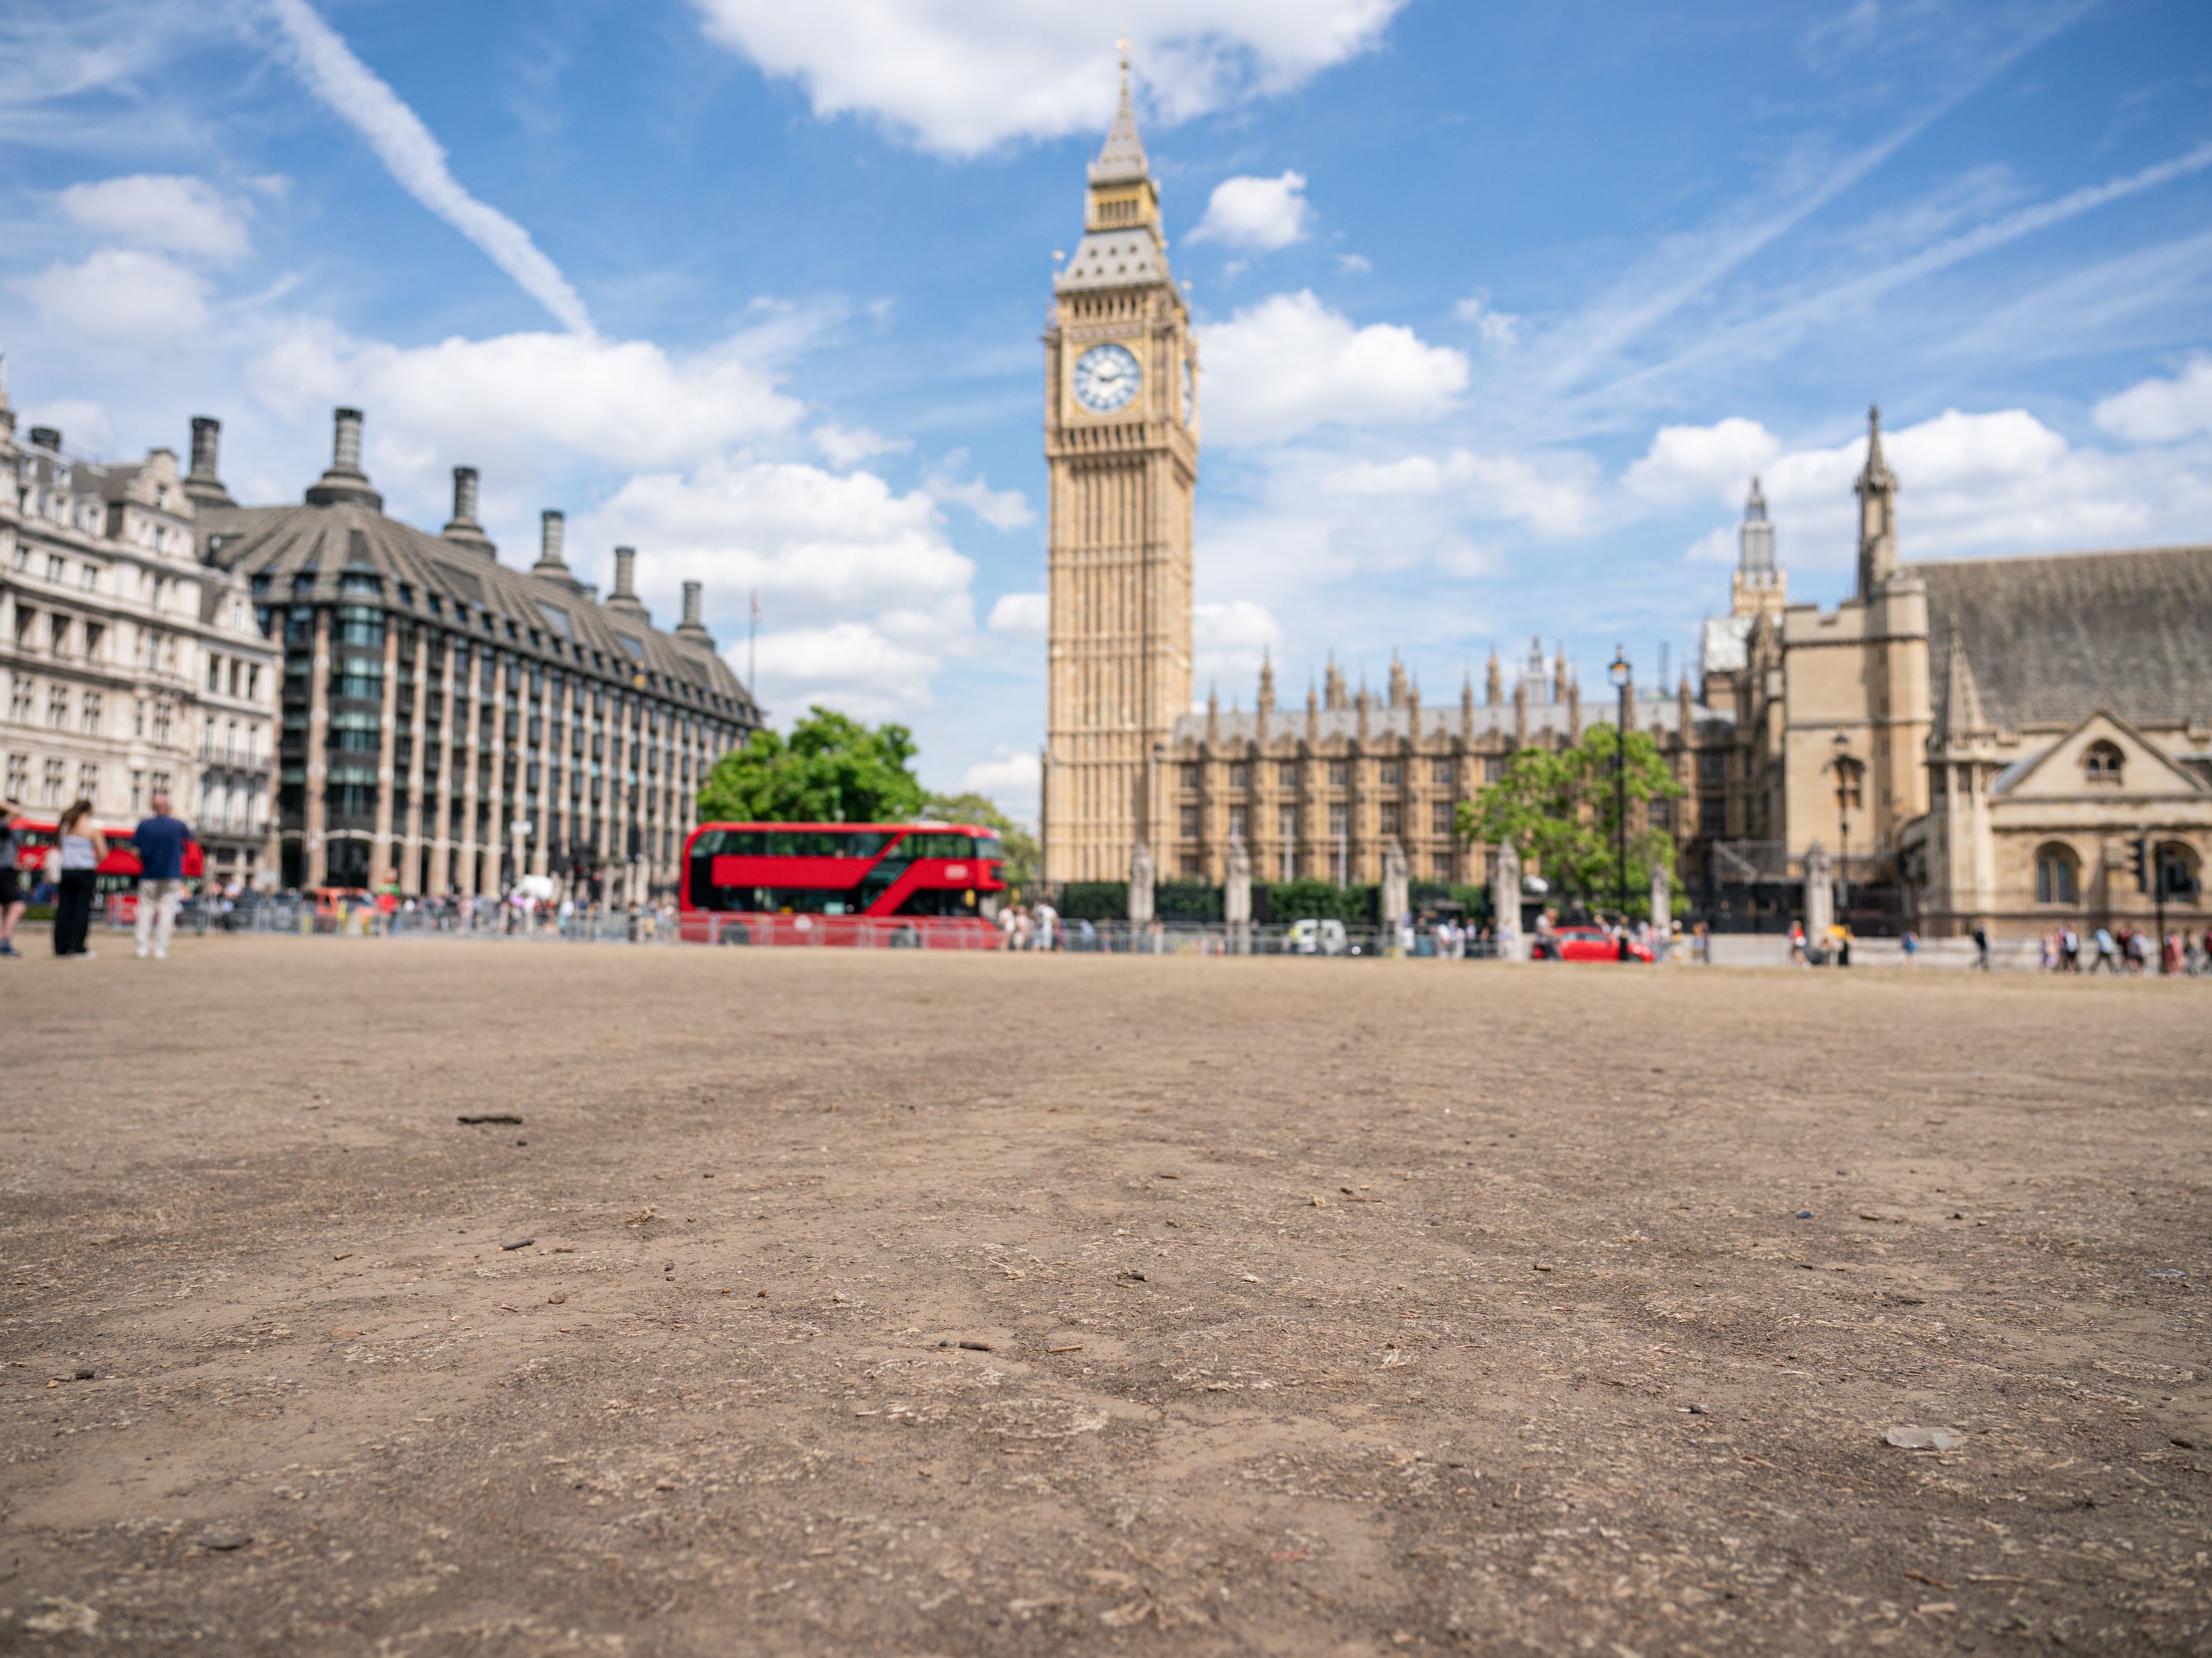 The ground in Parliament Square on Wednesday appears dried out and cracked from the heatwave